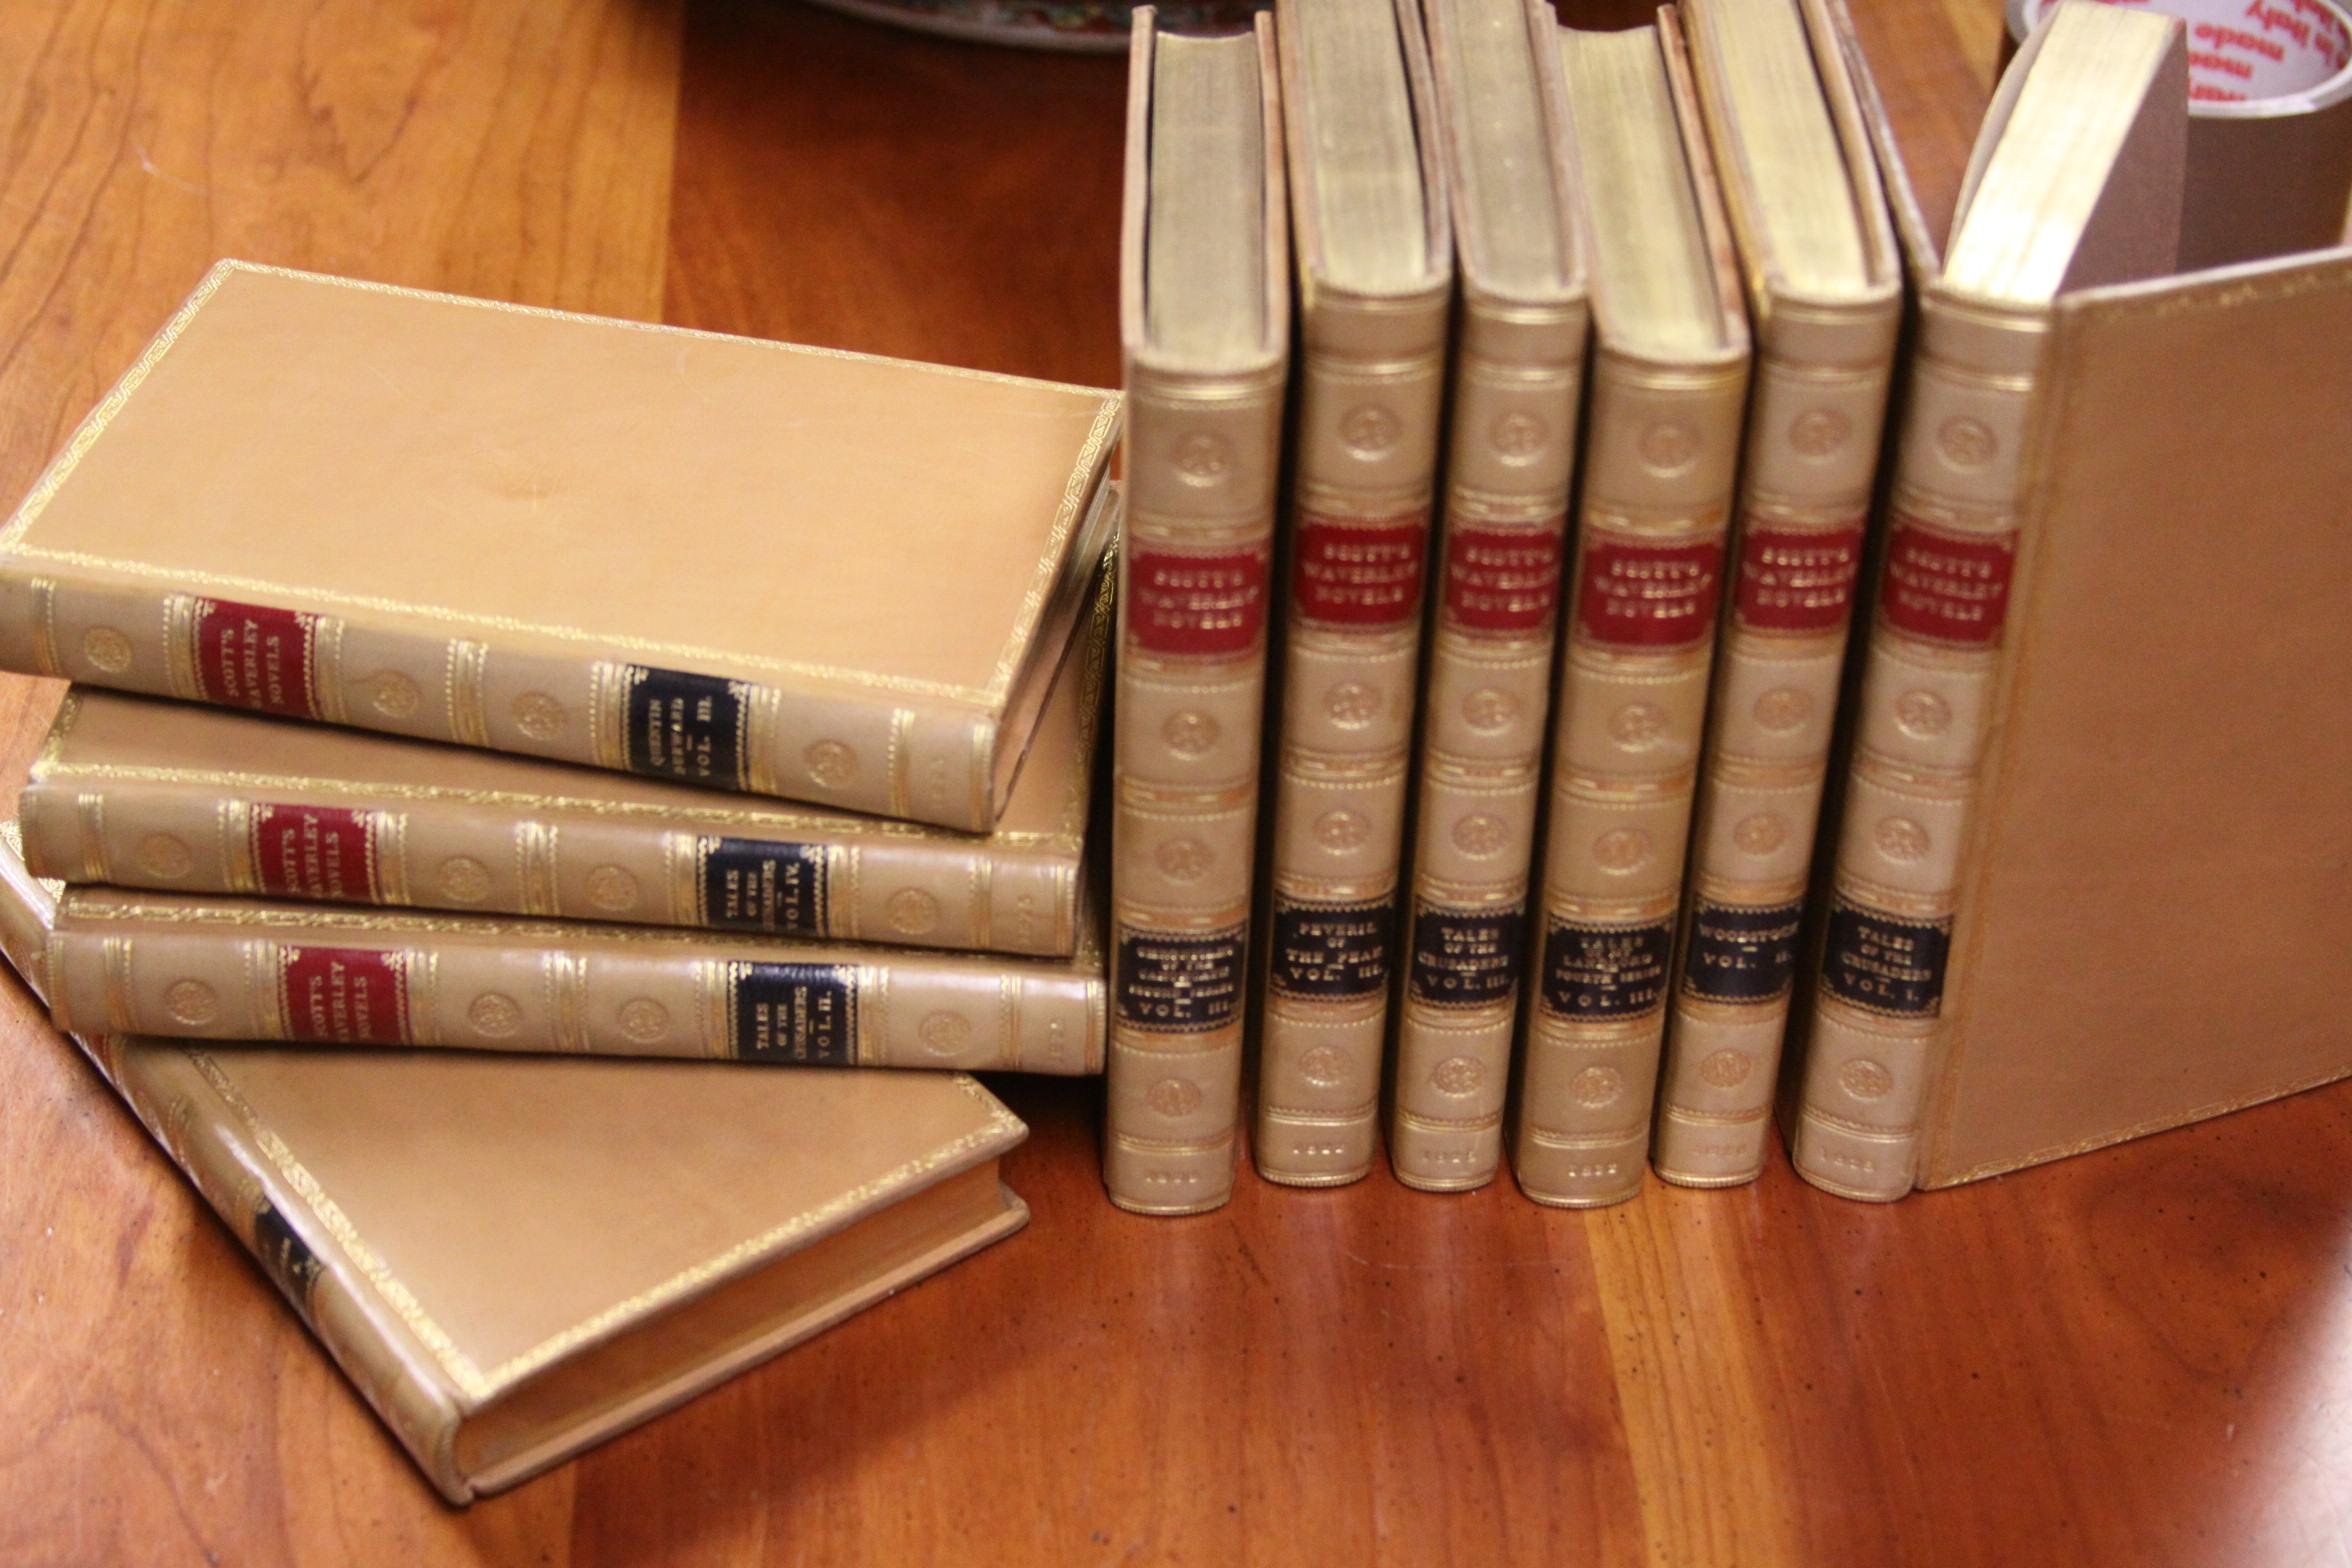 Books Sir. Walter Scott Writings Collections of Rare Antiques Books Collection 2